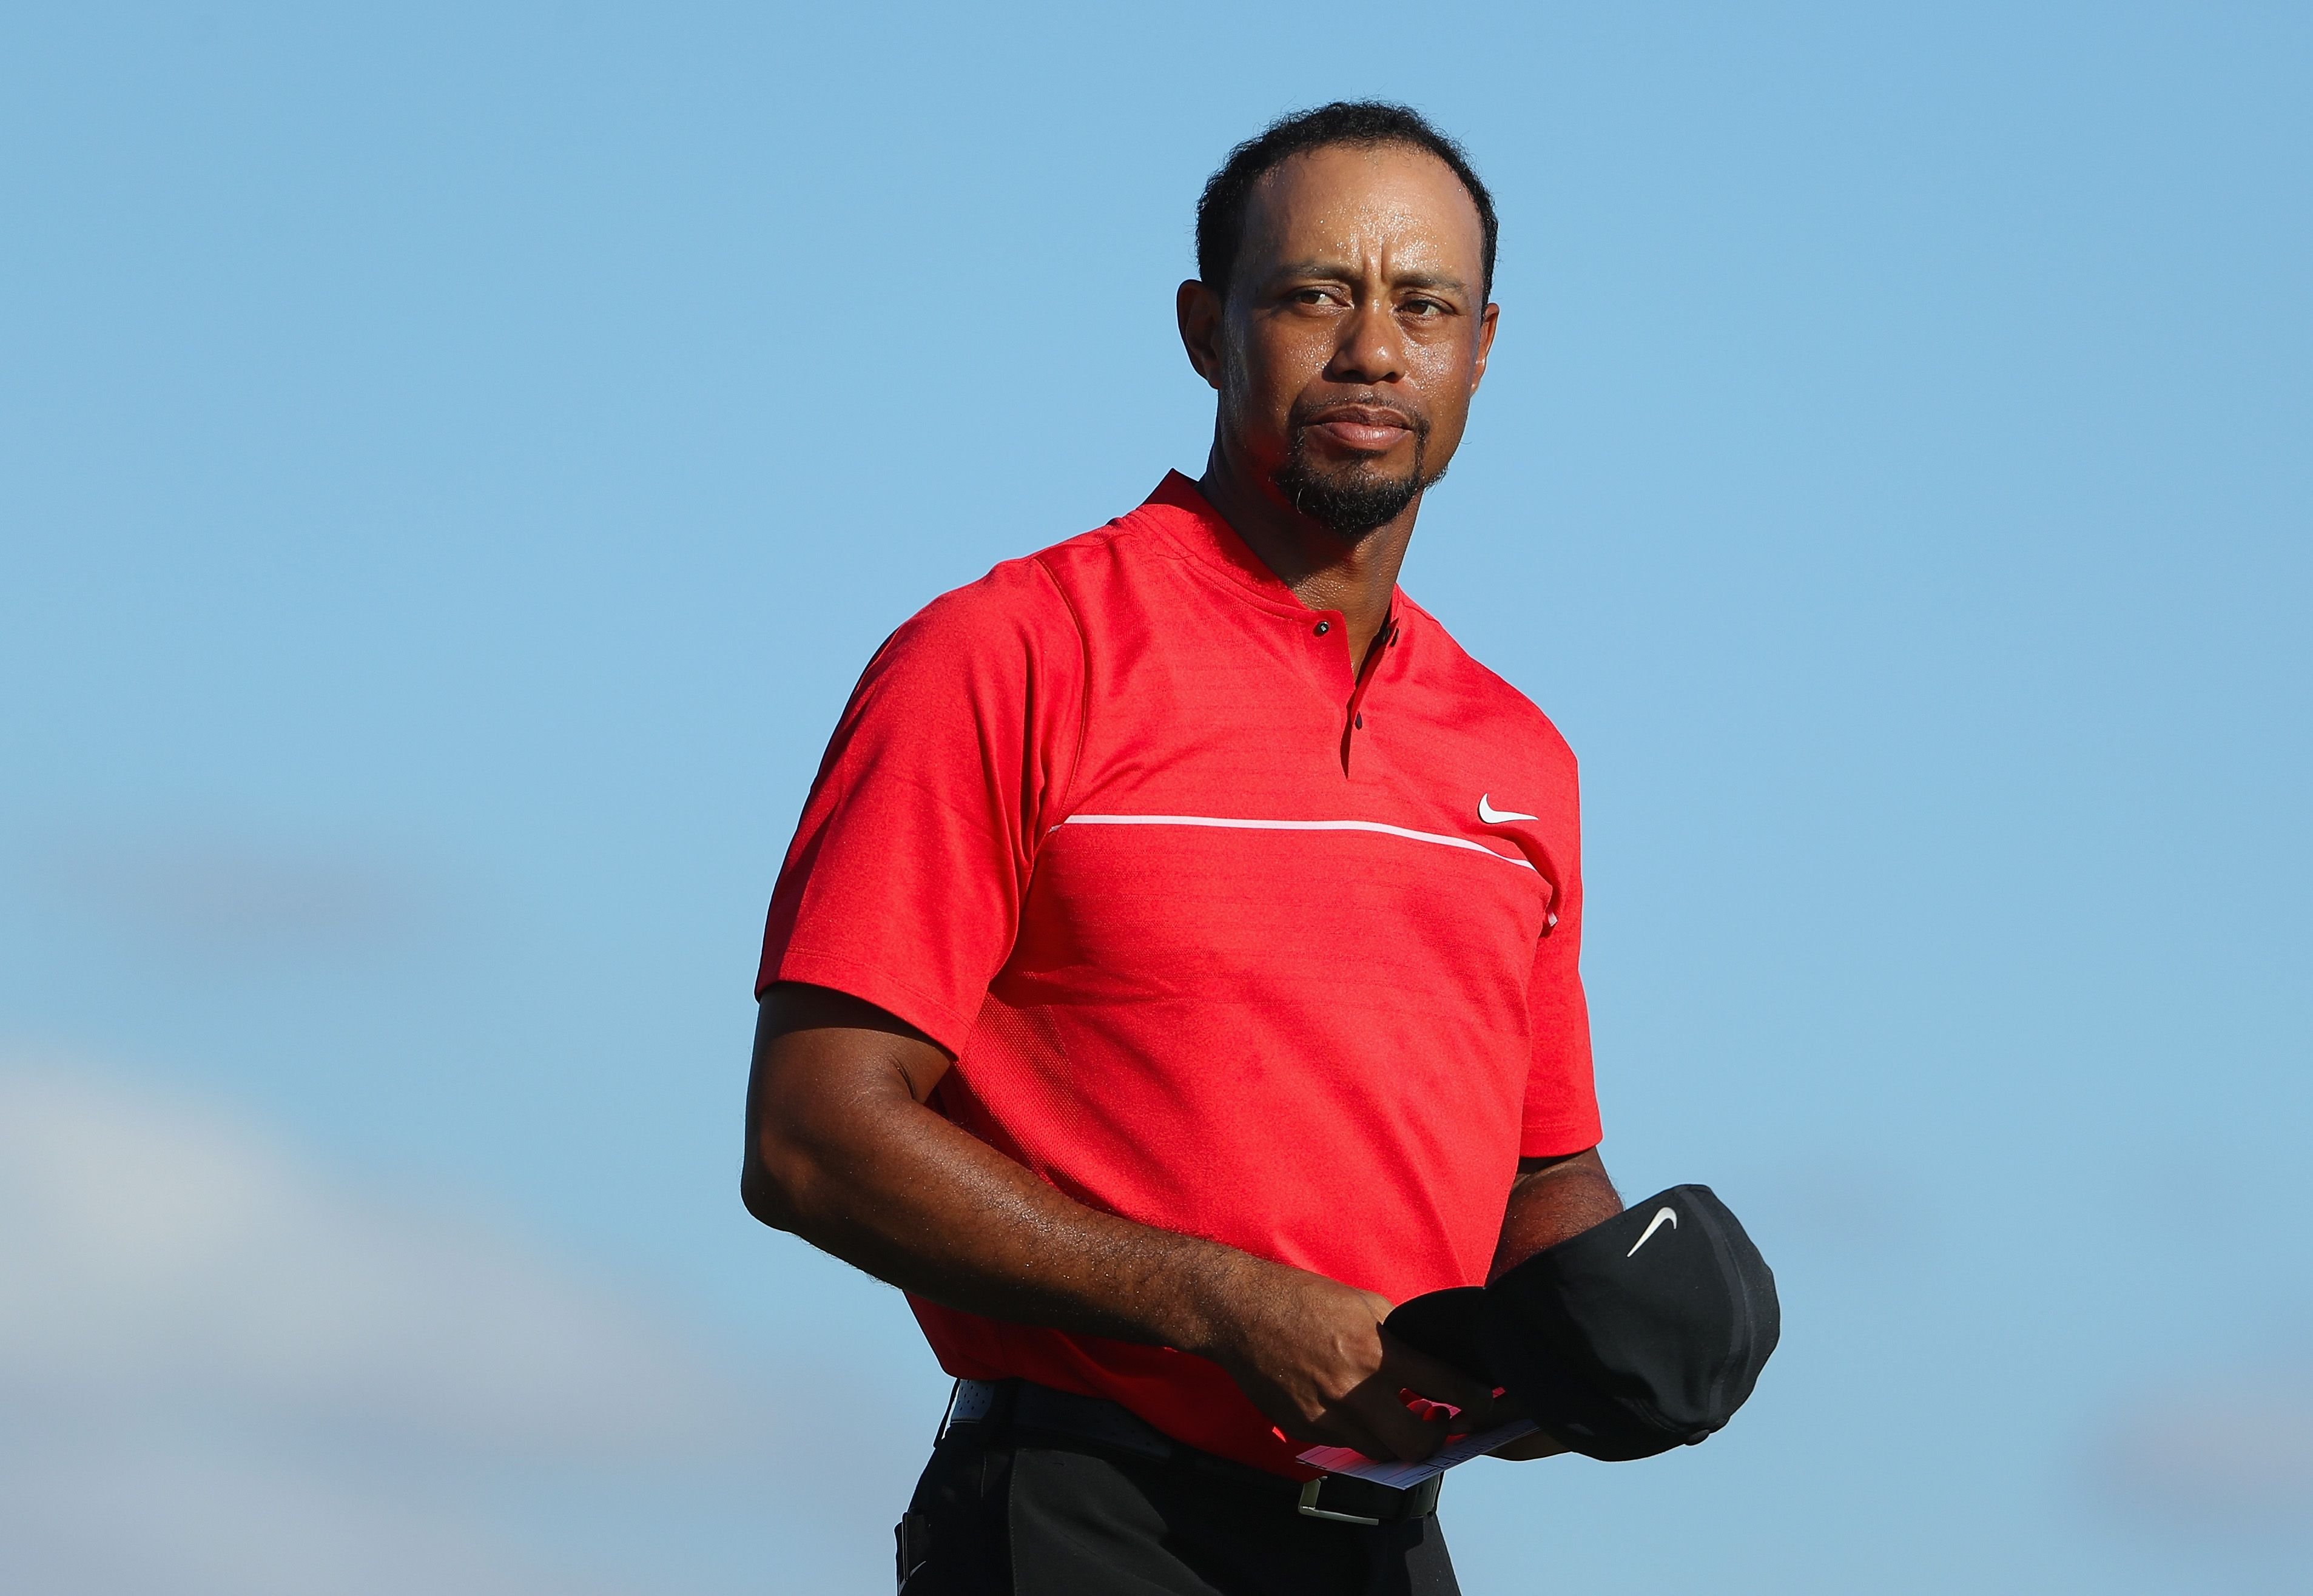 Tiger Woods at the 18th hole during the final round of the Hero World Challenge on December 4, 2016, in Nassau, Bahamas | Photo: Christian Petersen/Getty Images